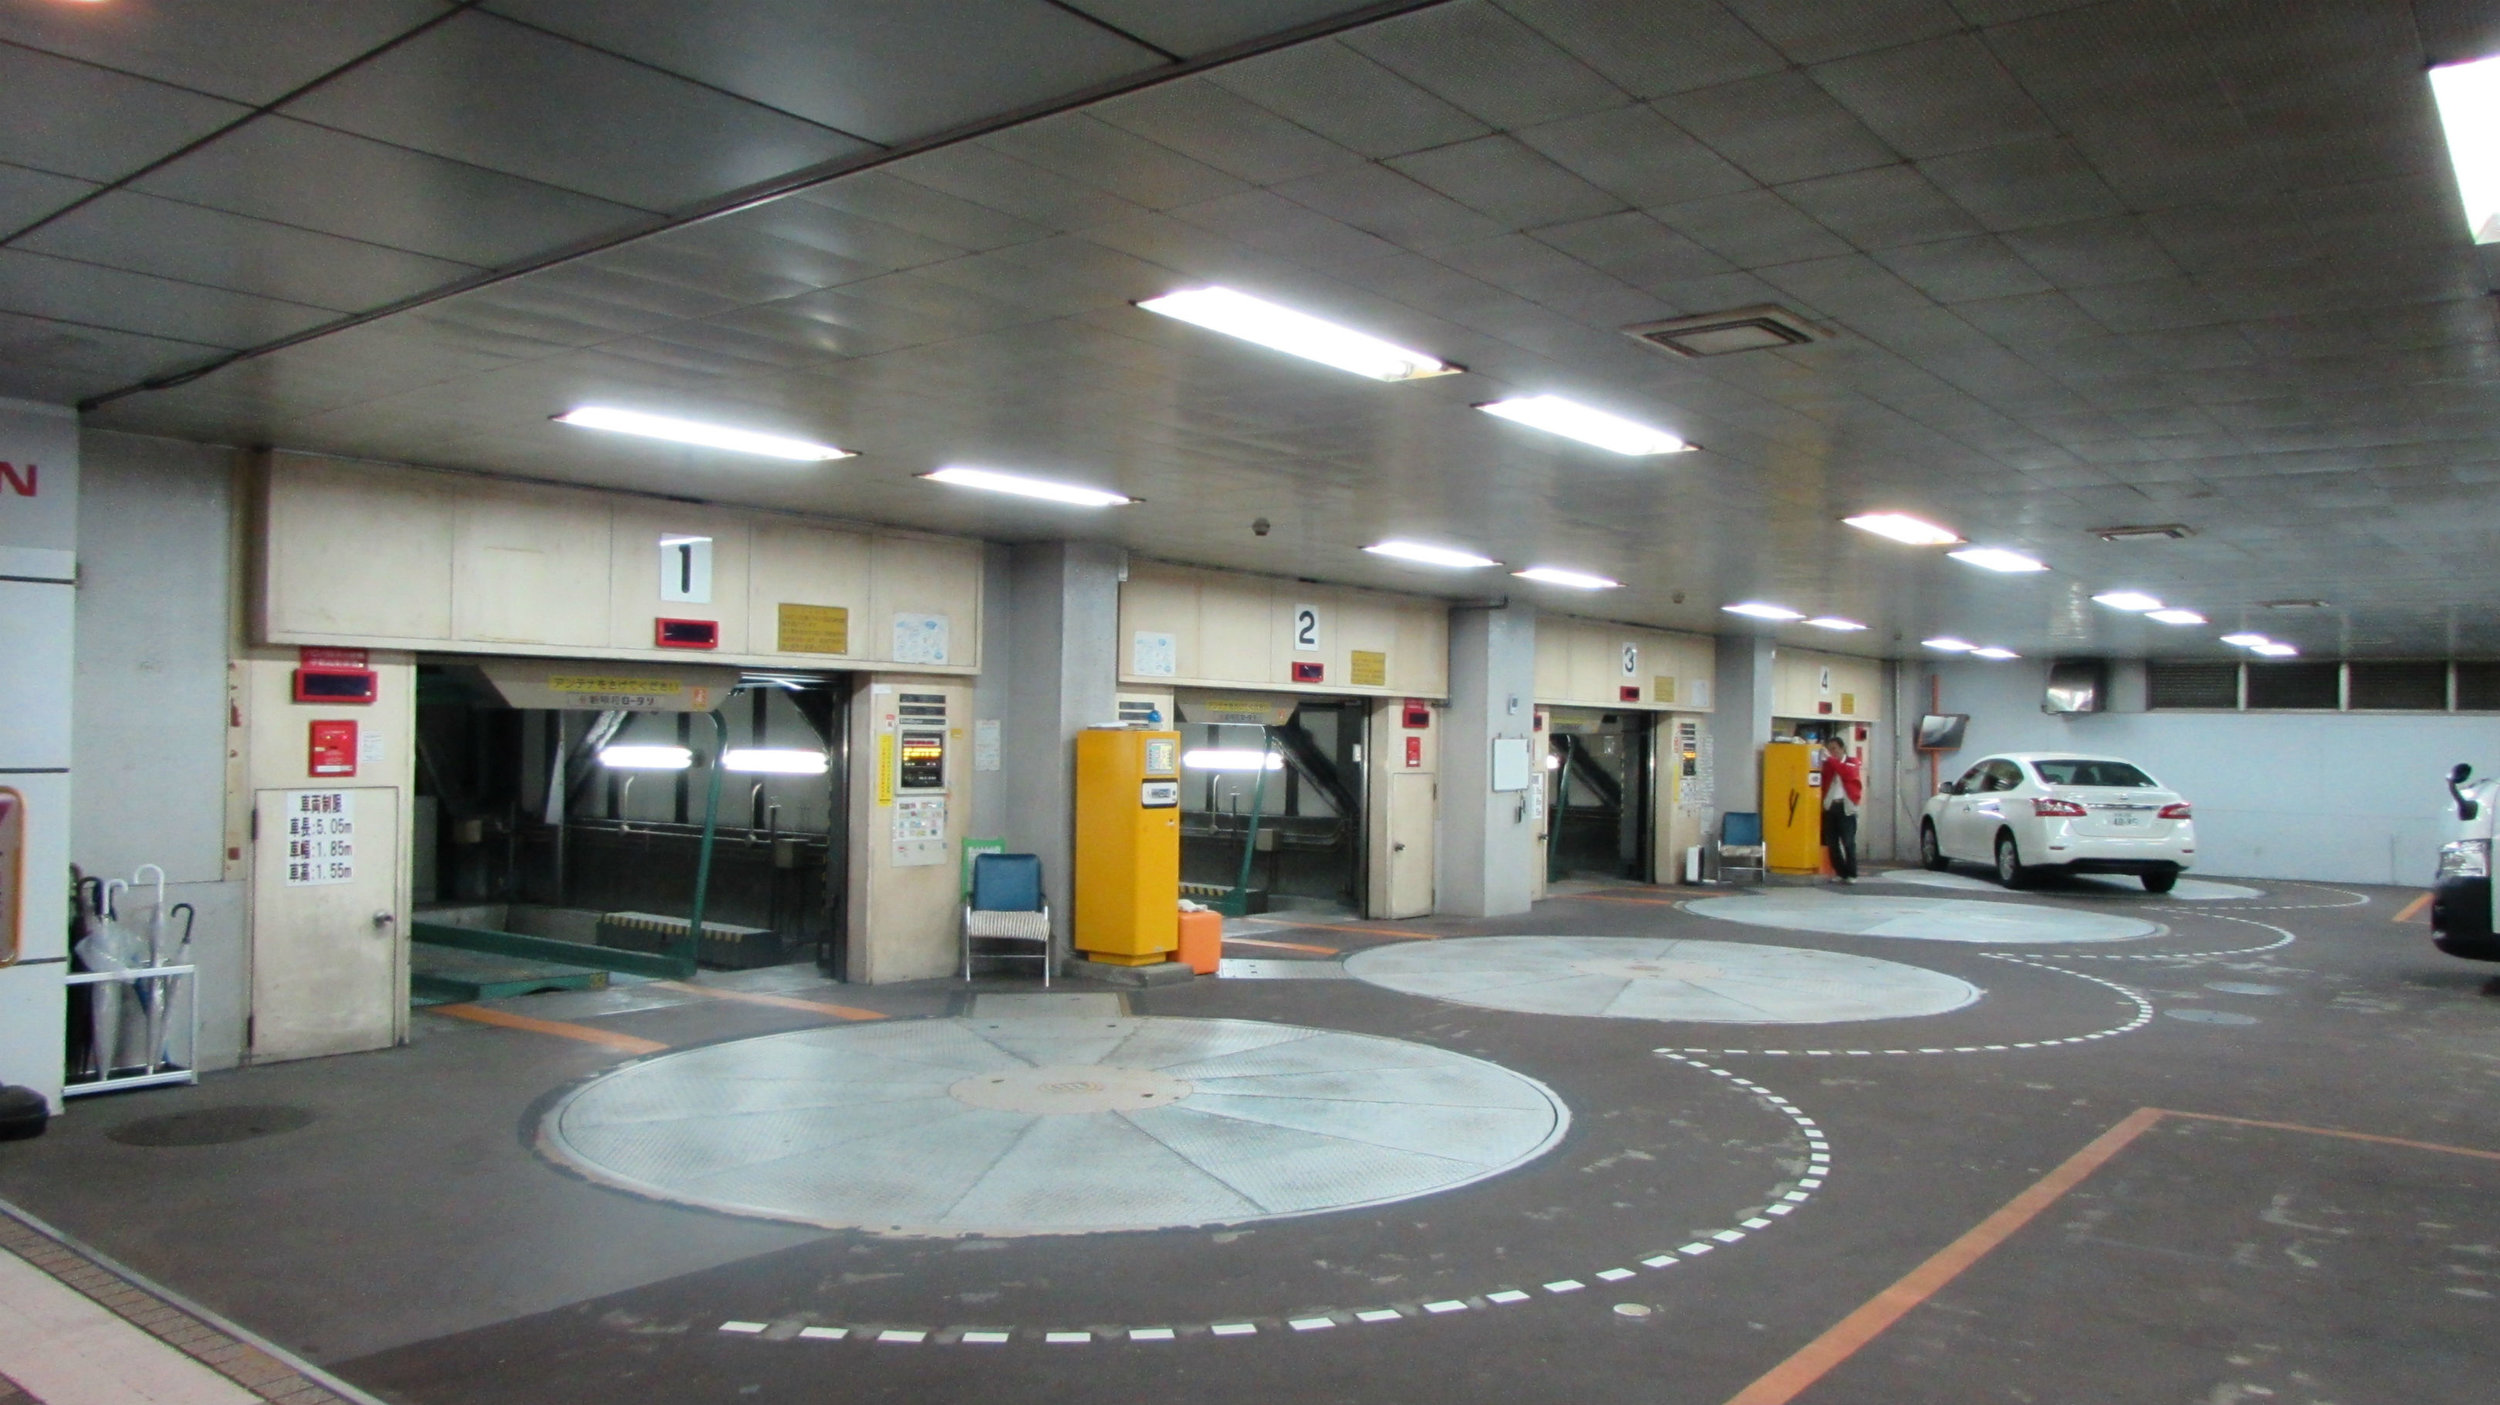 Revolving turning platforms and elevators to drive cars into a parking house